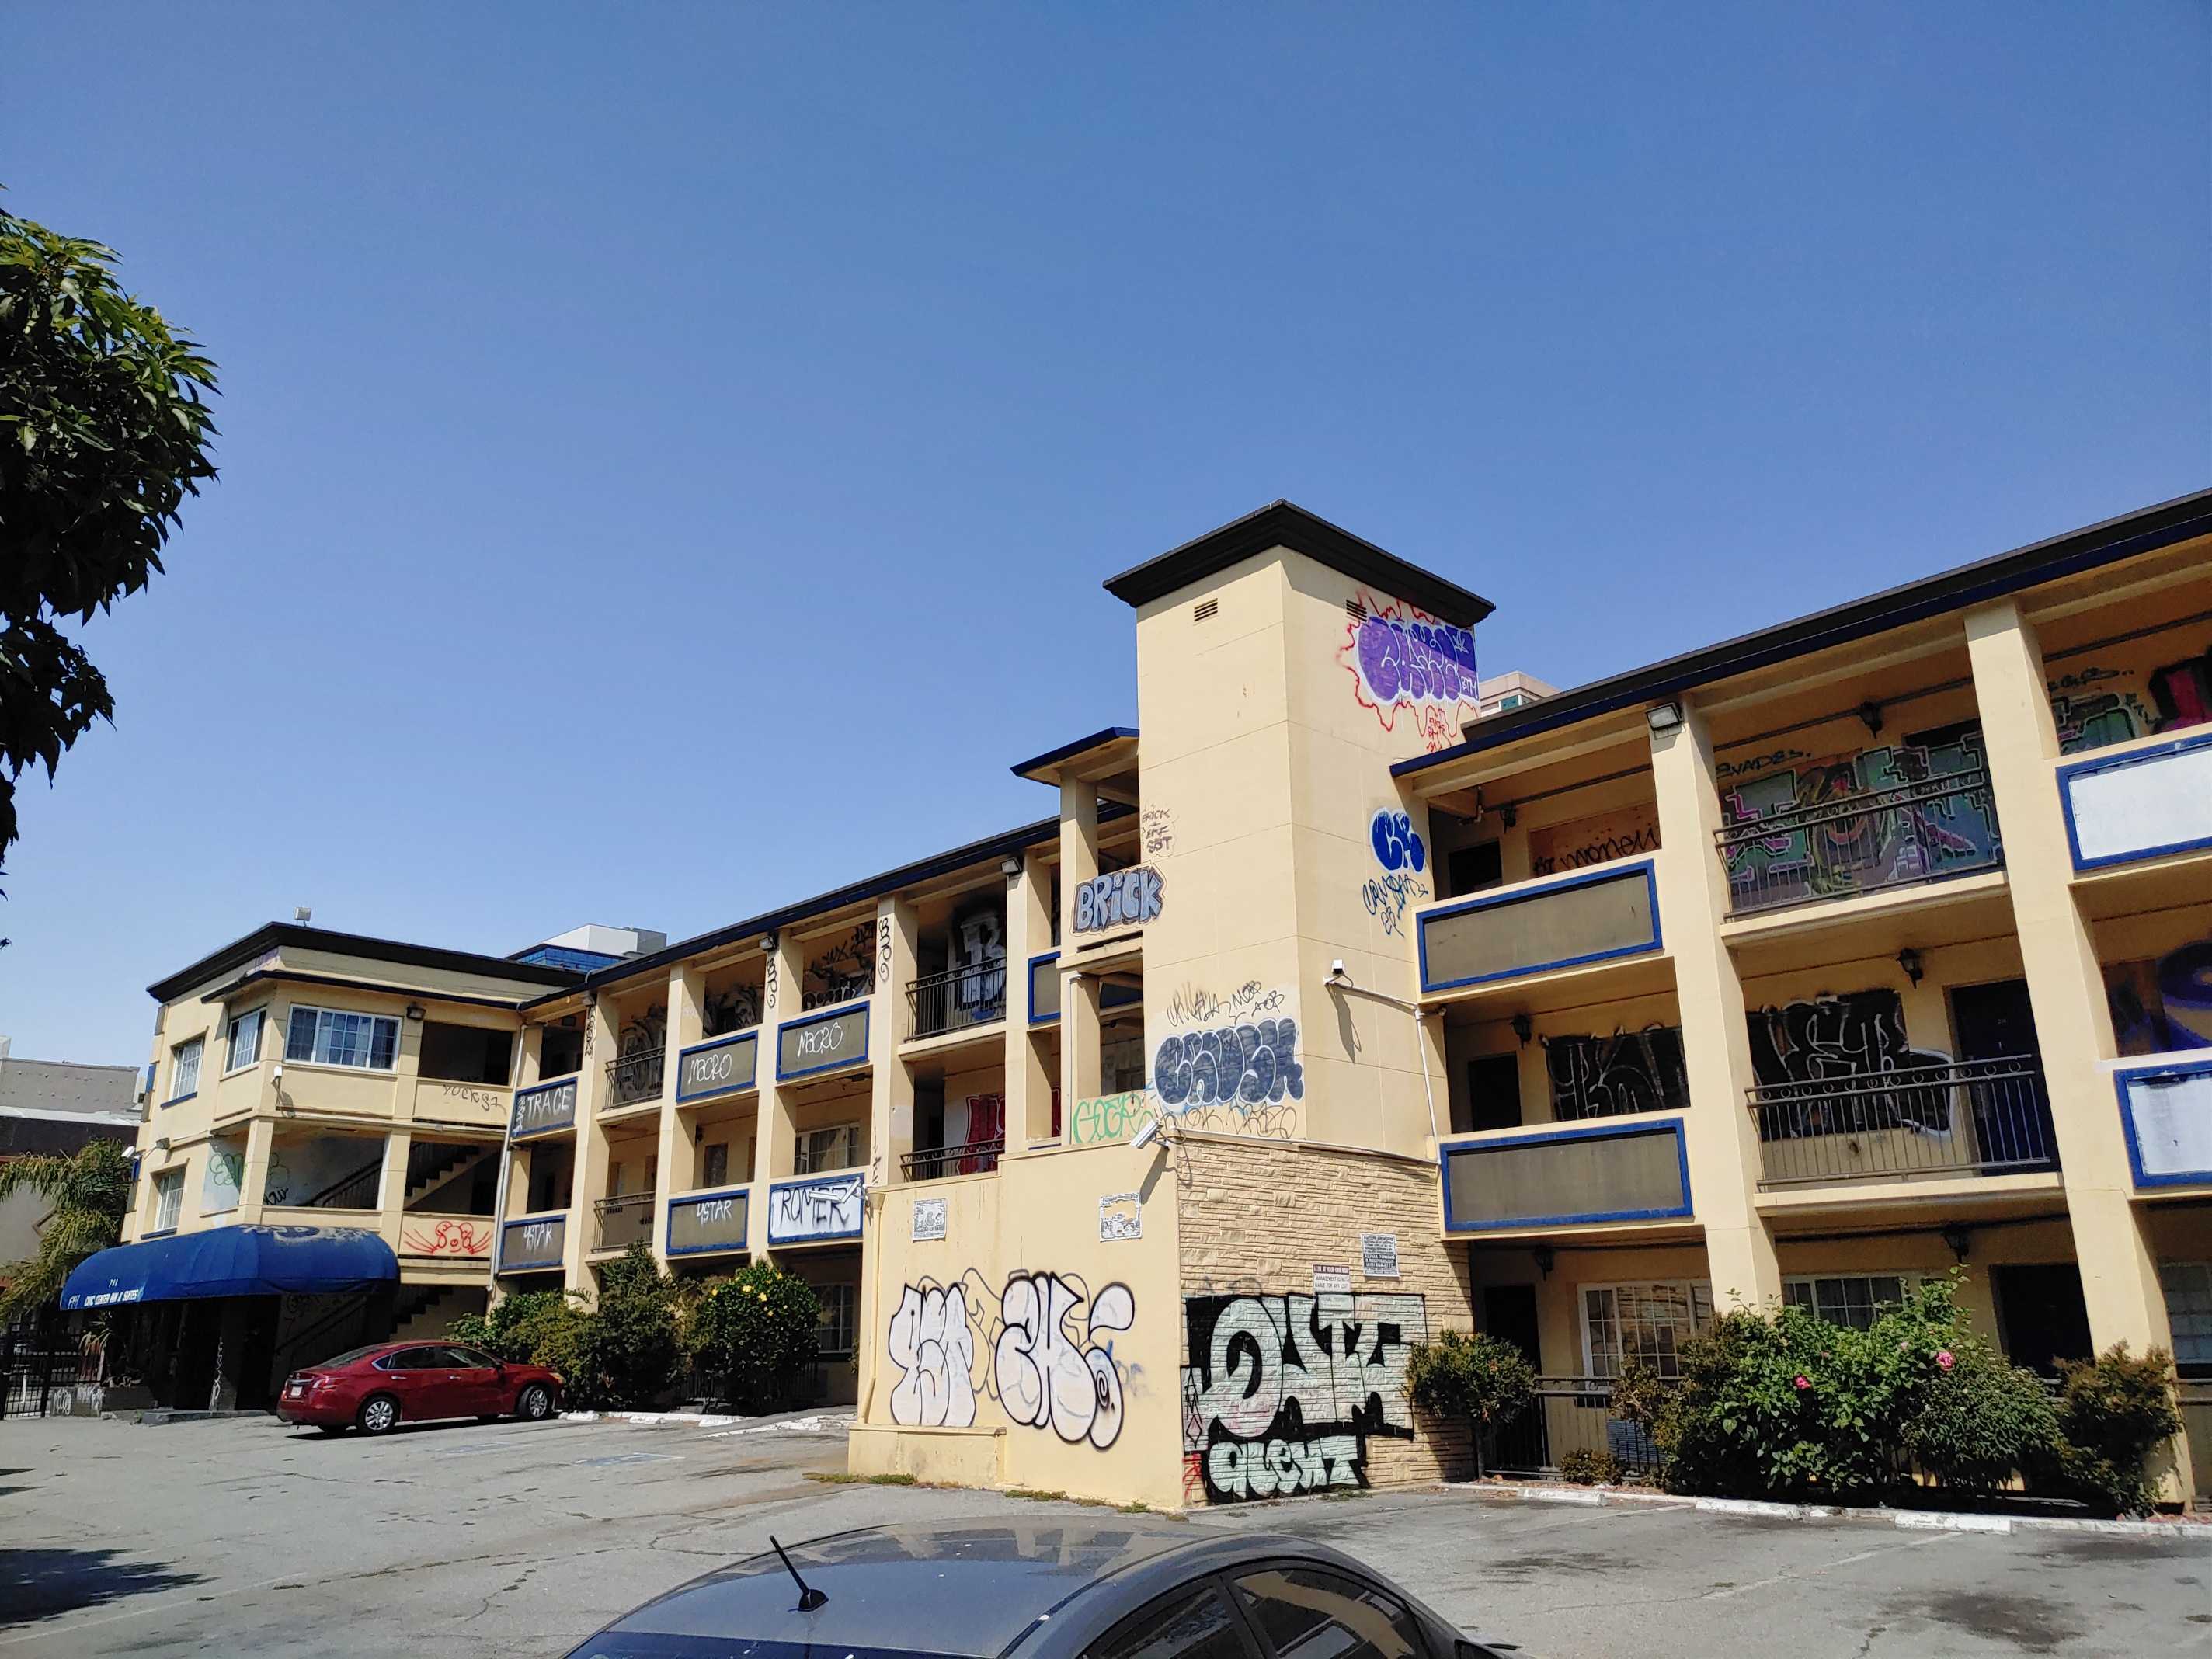 A three-story motel with graffiti on its walls under a clear blue sky. A red car is parked in the lot.